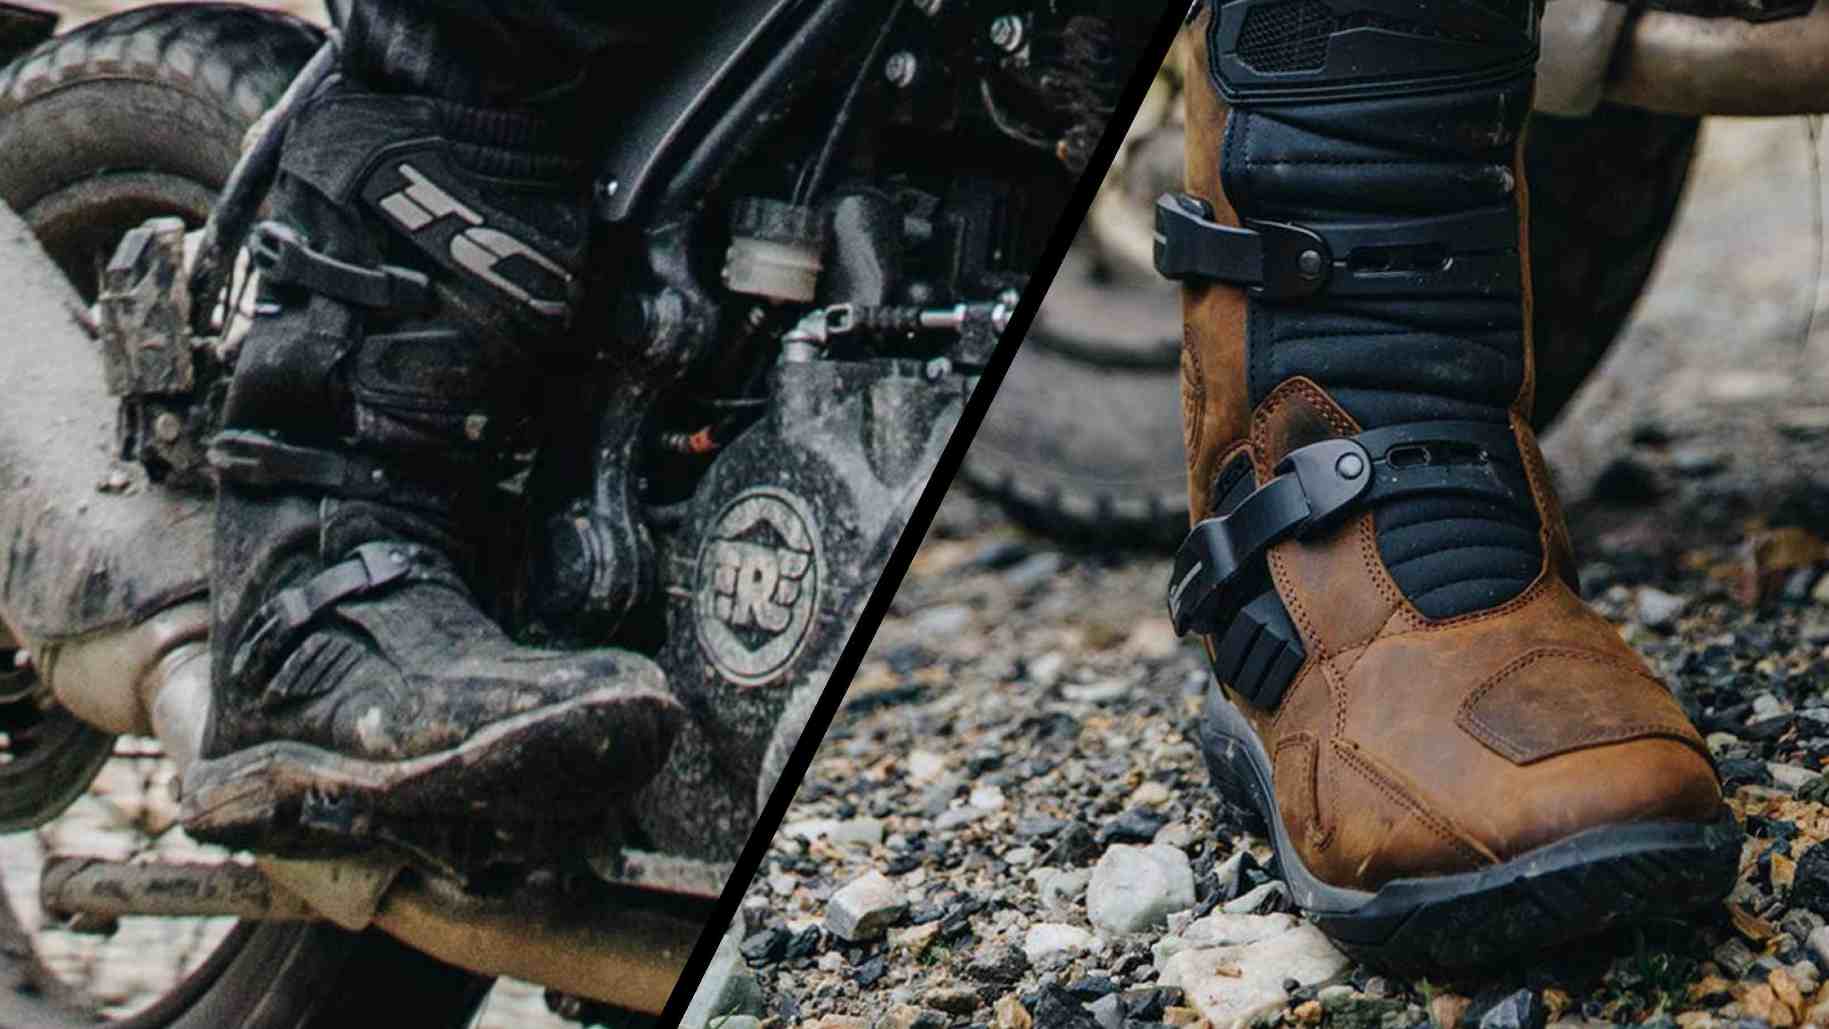 Riding Shoes - Cycle Gear-totobed.com.vn